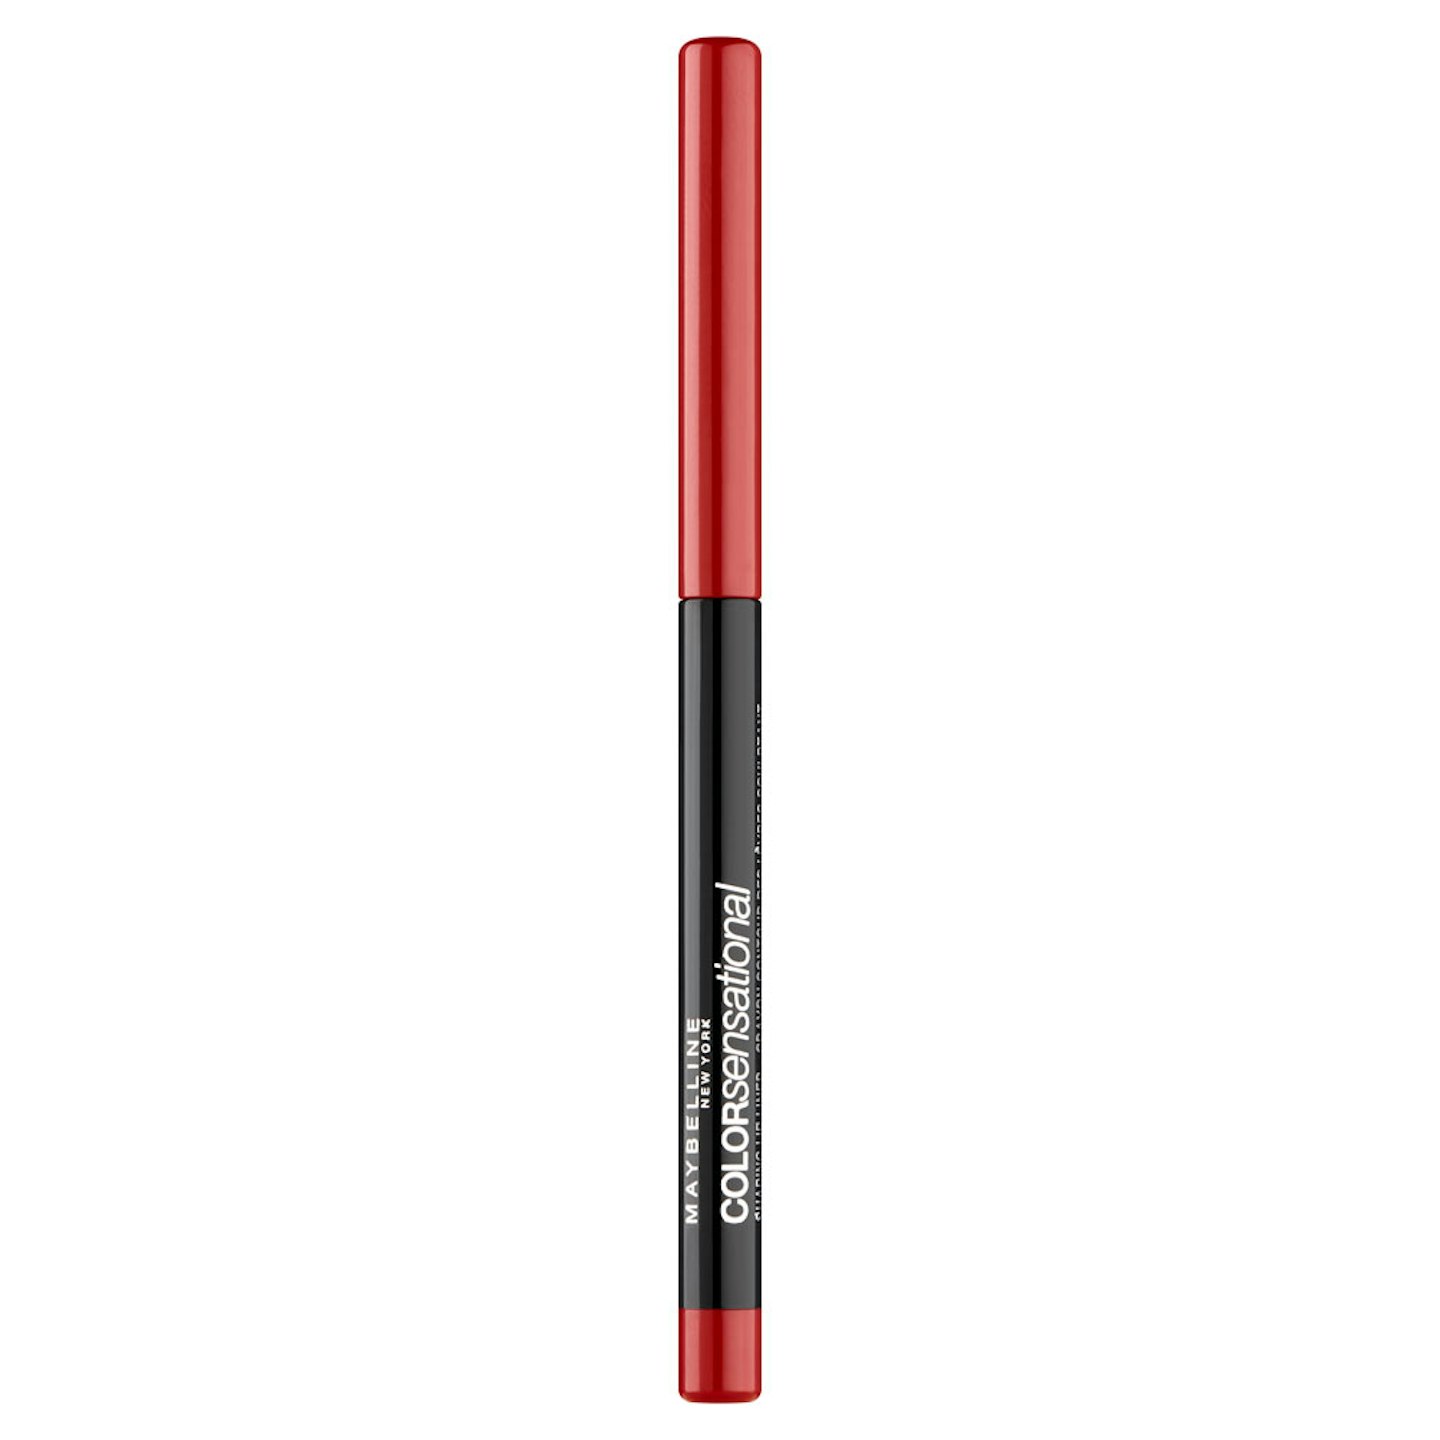 Maybelline Color Sensational Lip Liner in Brick Red, 3.99 from Boots